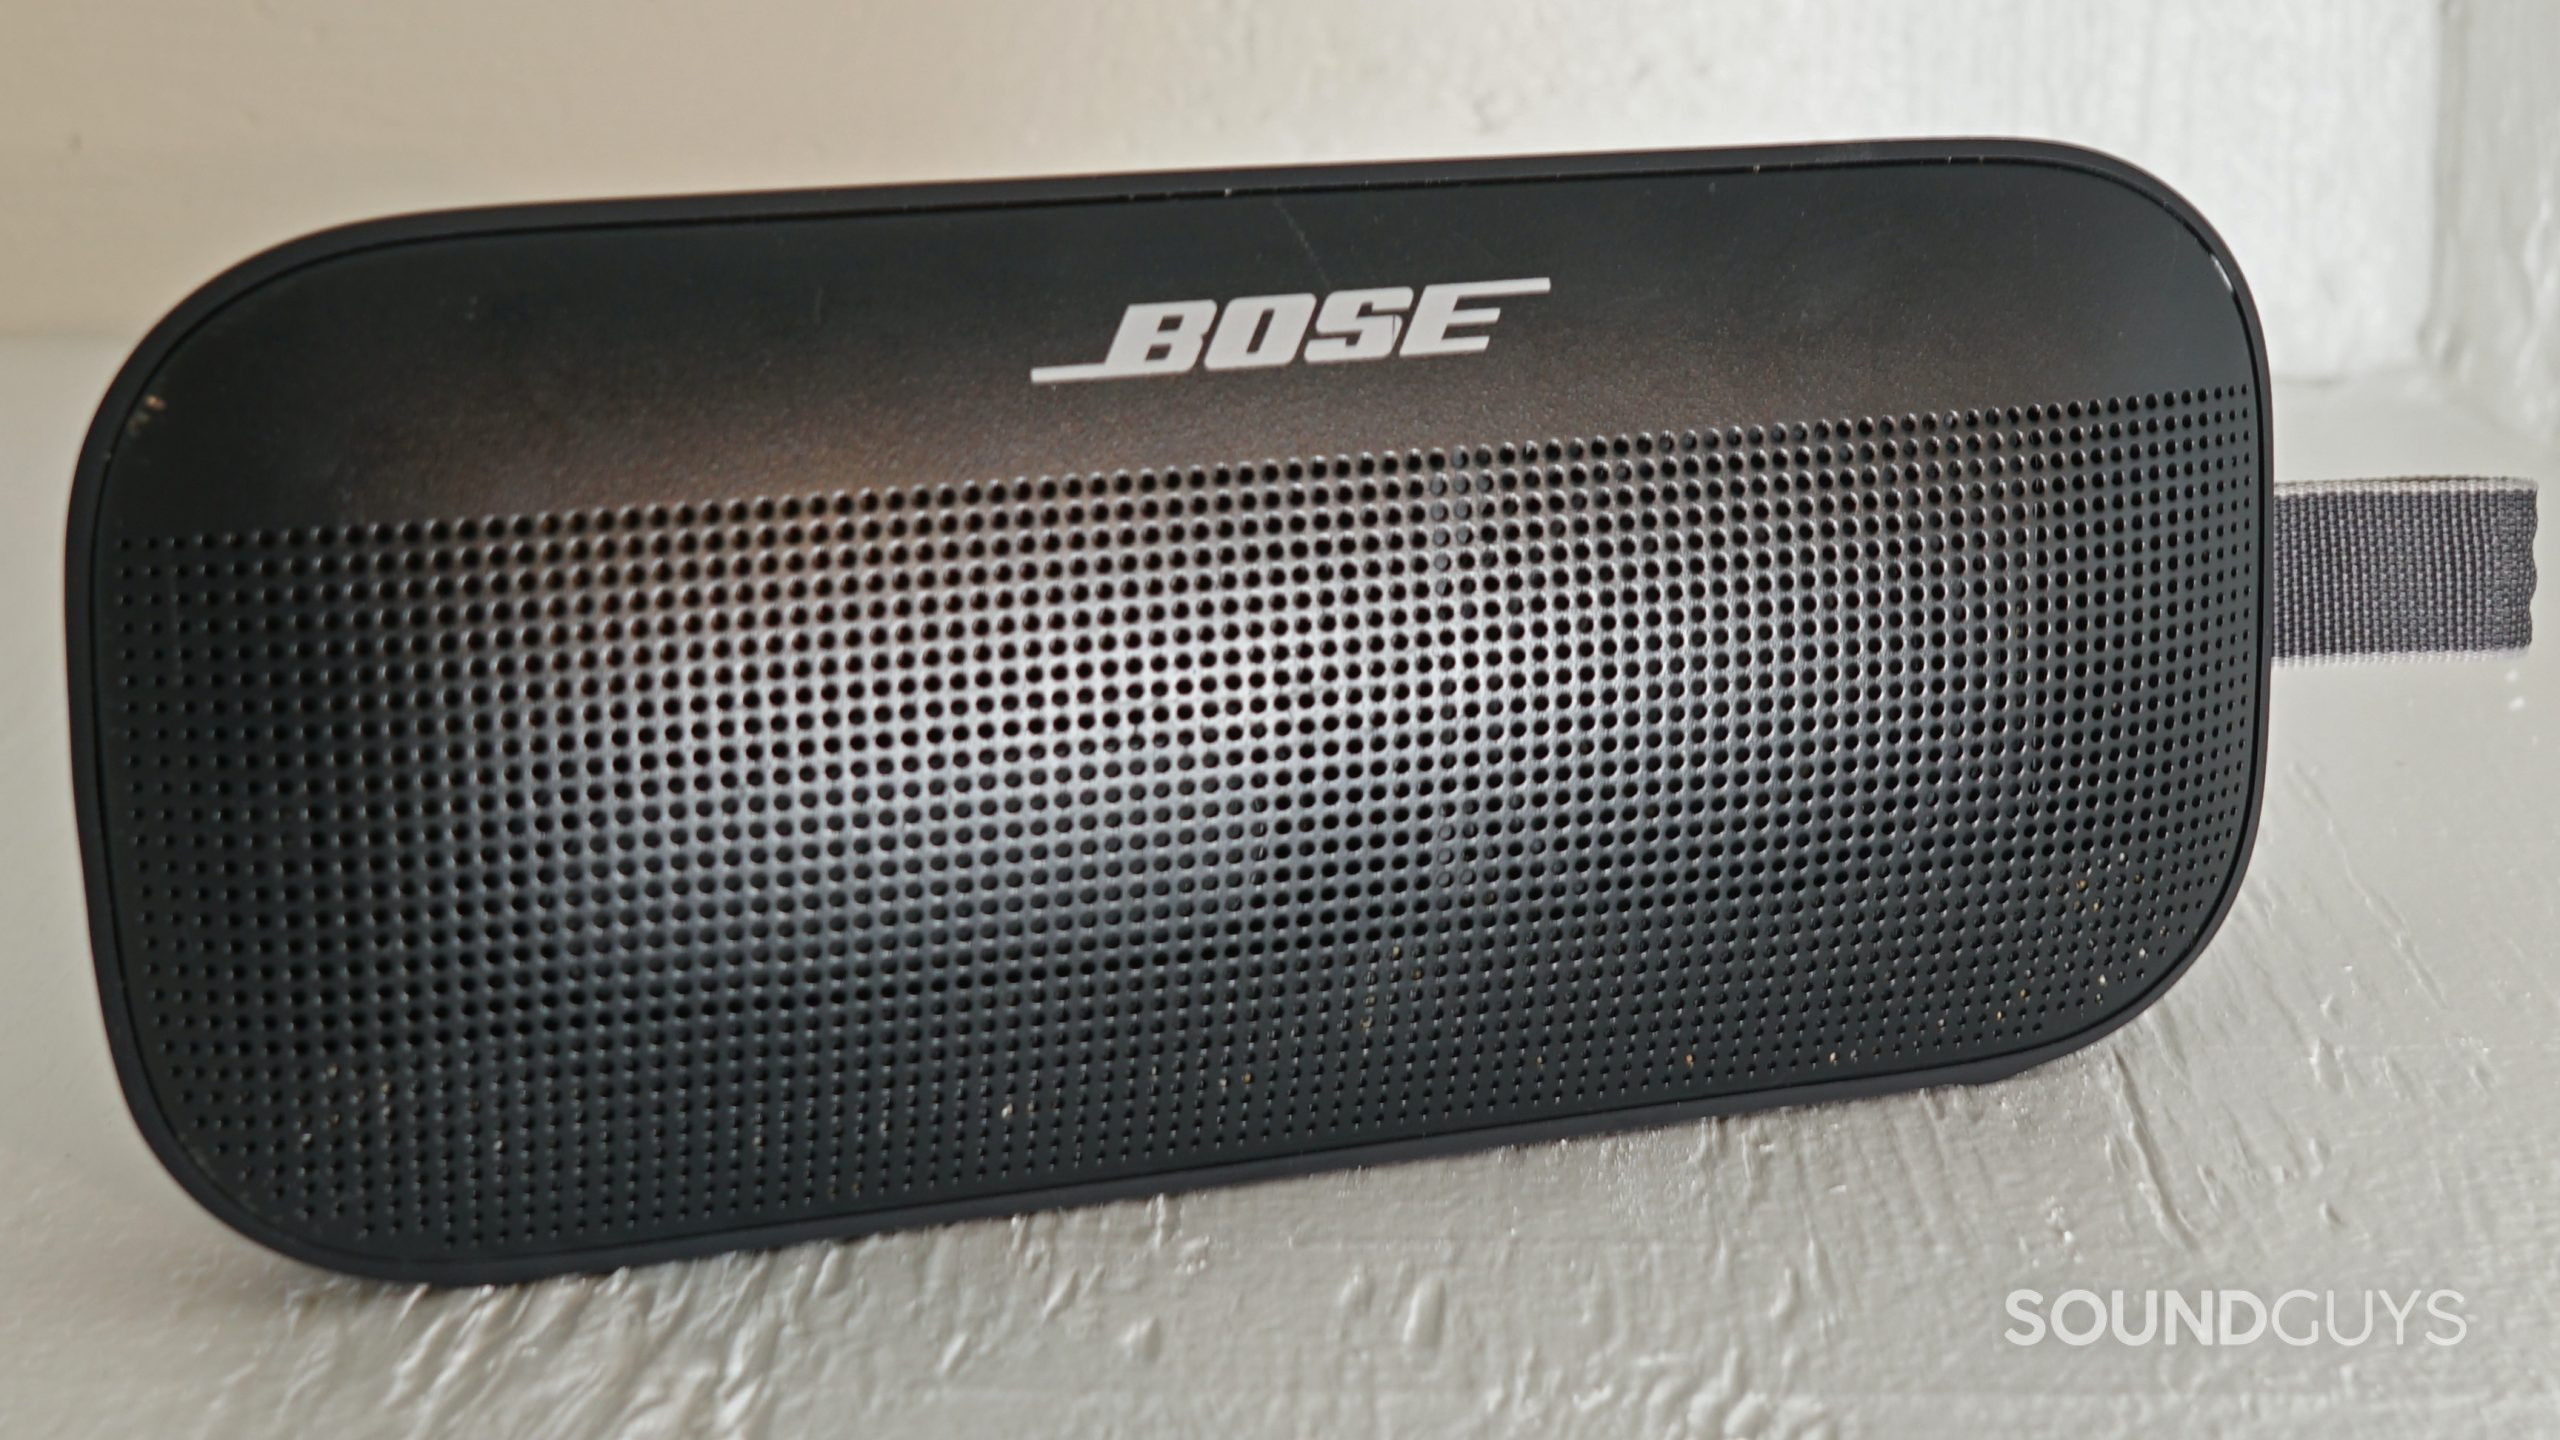 The Bose SoundLink Flex in black on top of a gray surface.